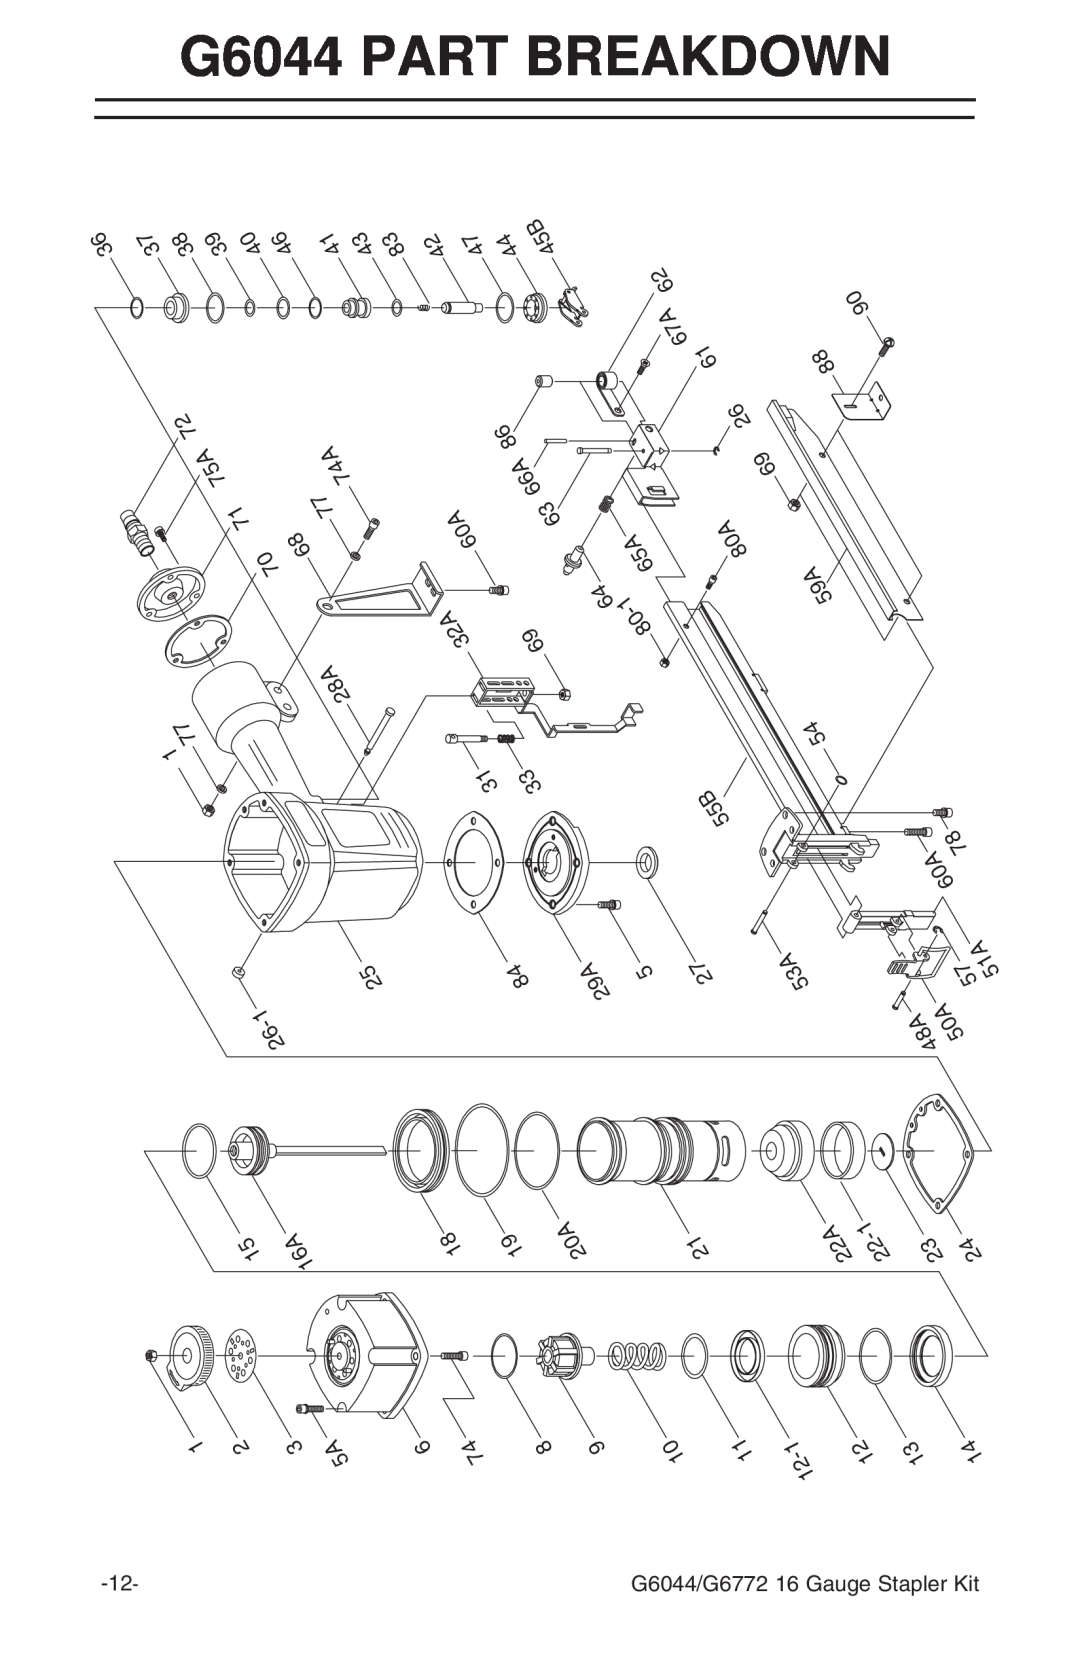 Grizzly G6772 instruction manual G6044 PART BREAKDOWN, 414383 